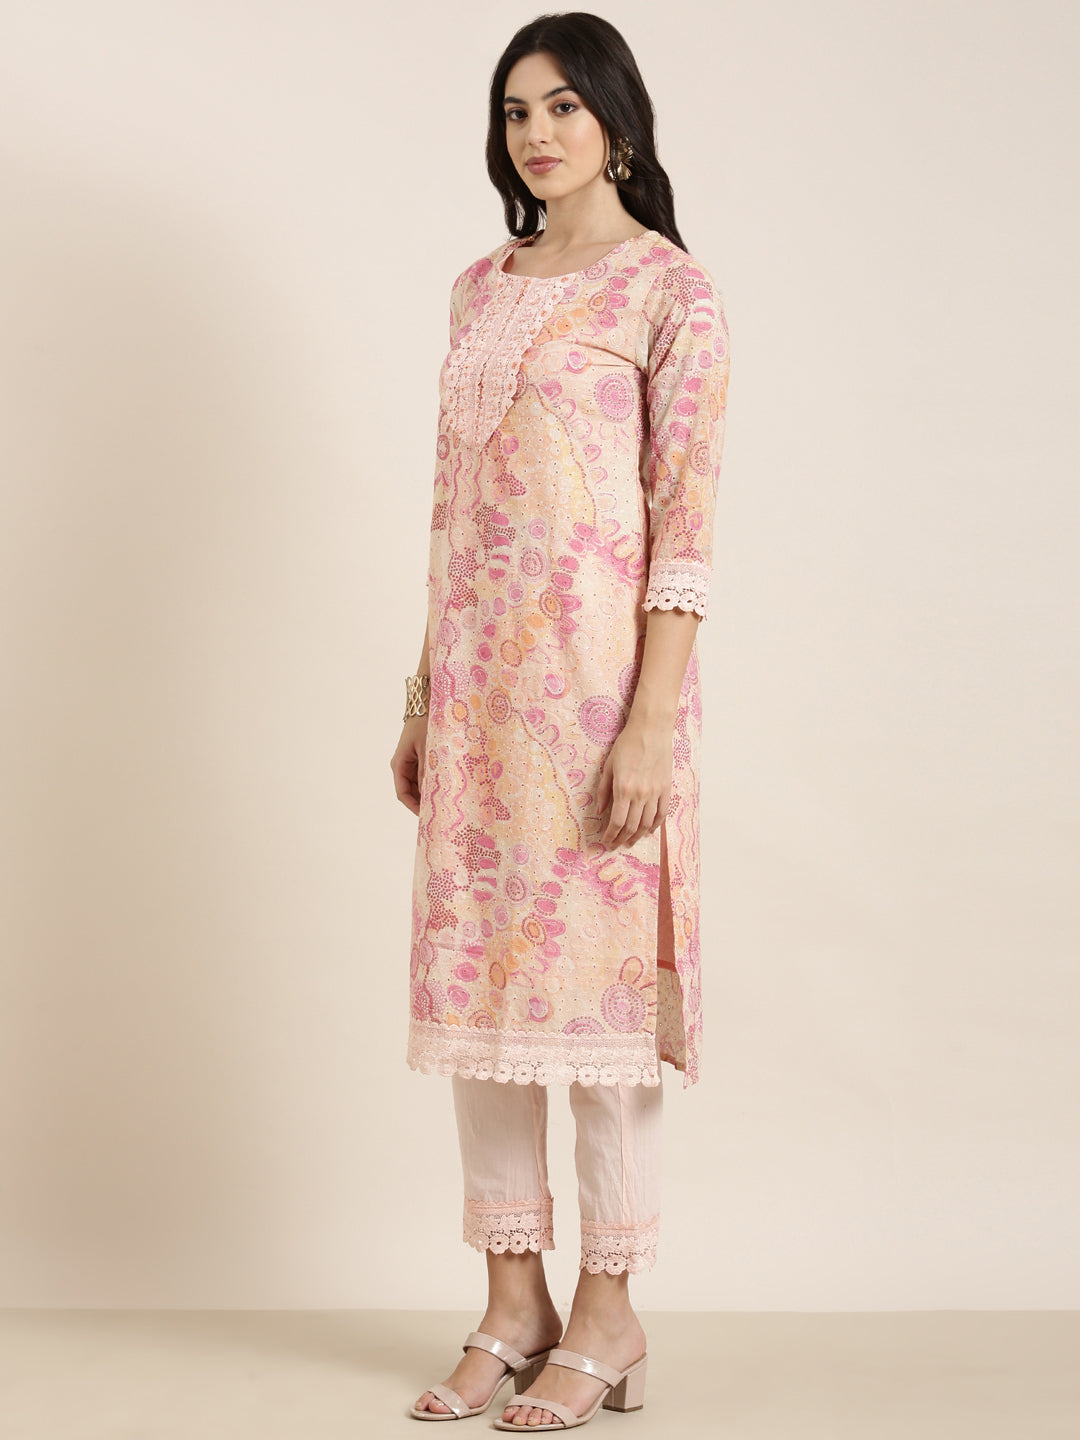 Women Straight Peach Floral Kurta and Trousers Set Comes With Dupatta